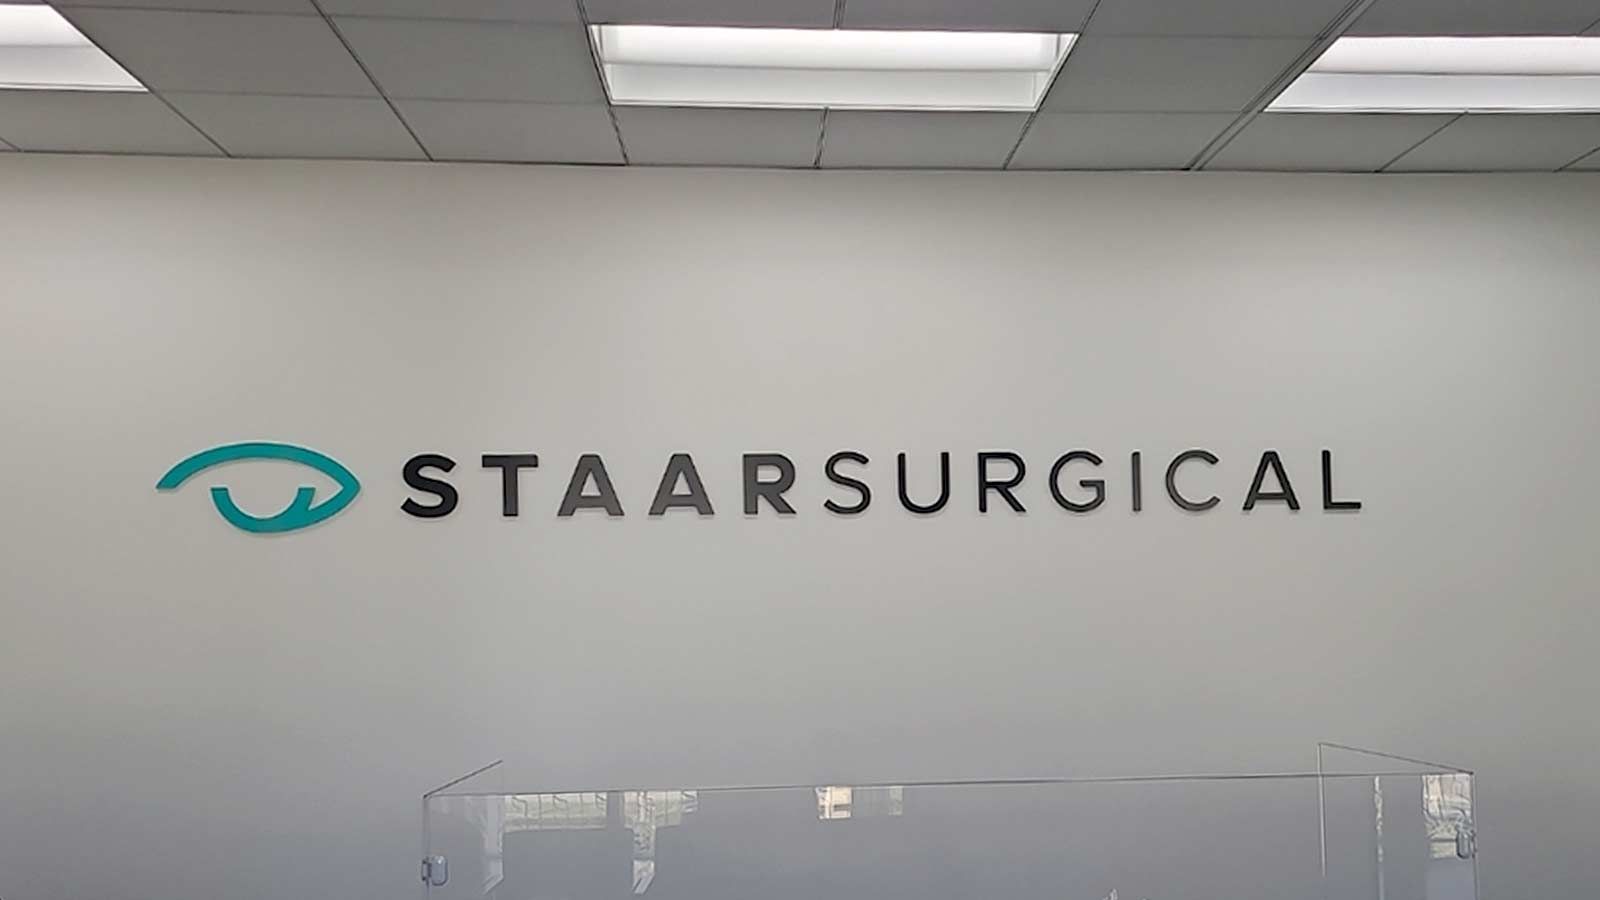 Staar Surgical acrylic sign mounted on the office wall